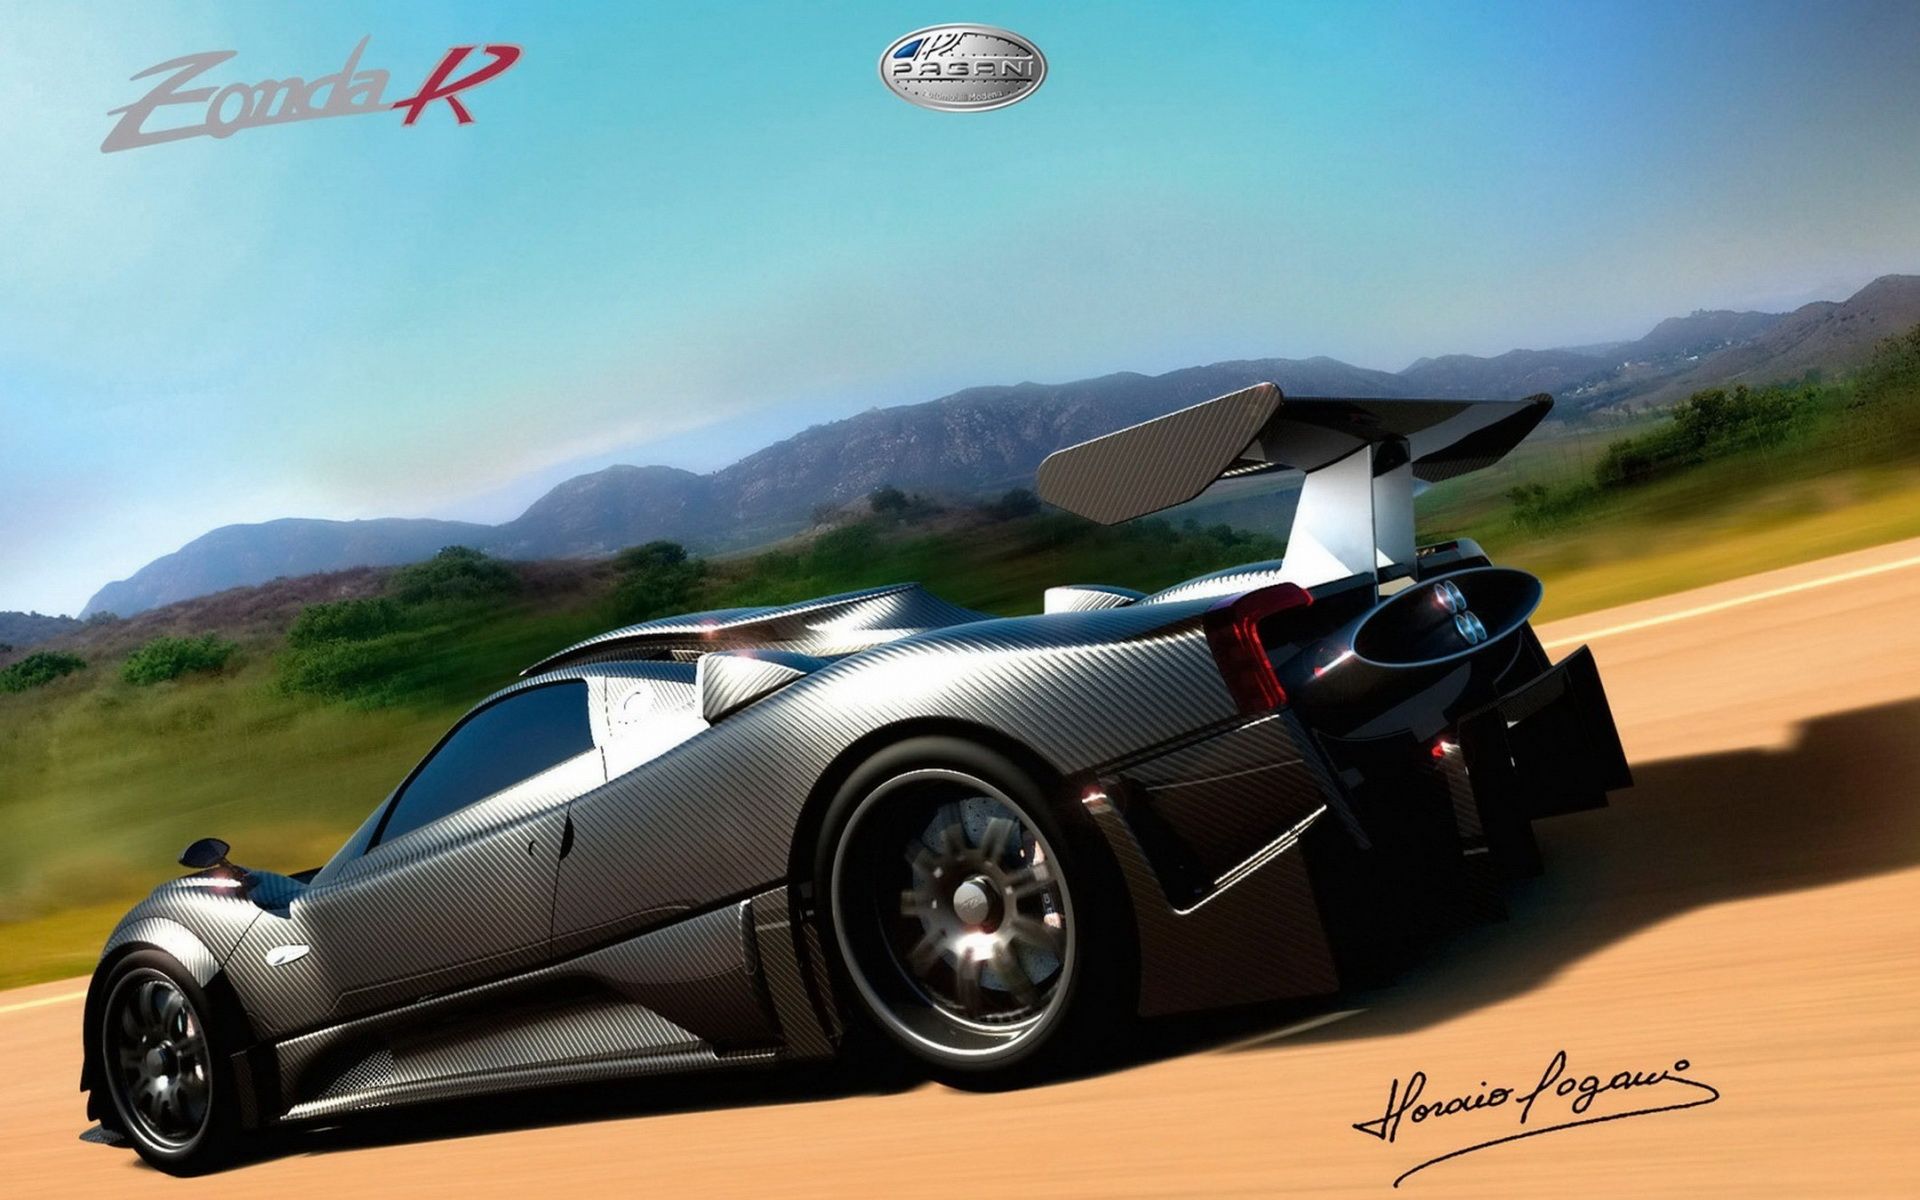 Awesome Cars Wallpaper - Wallpapers High Definition